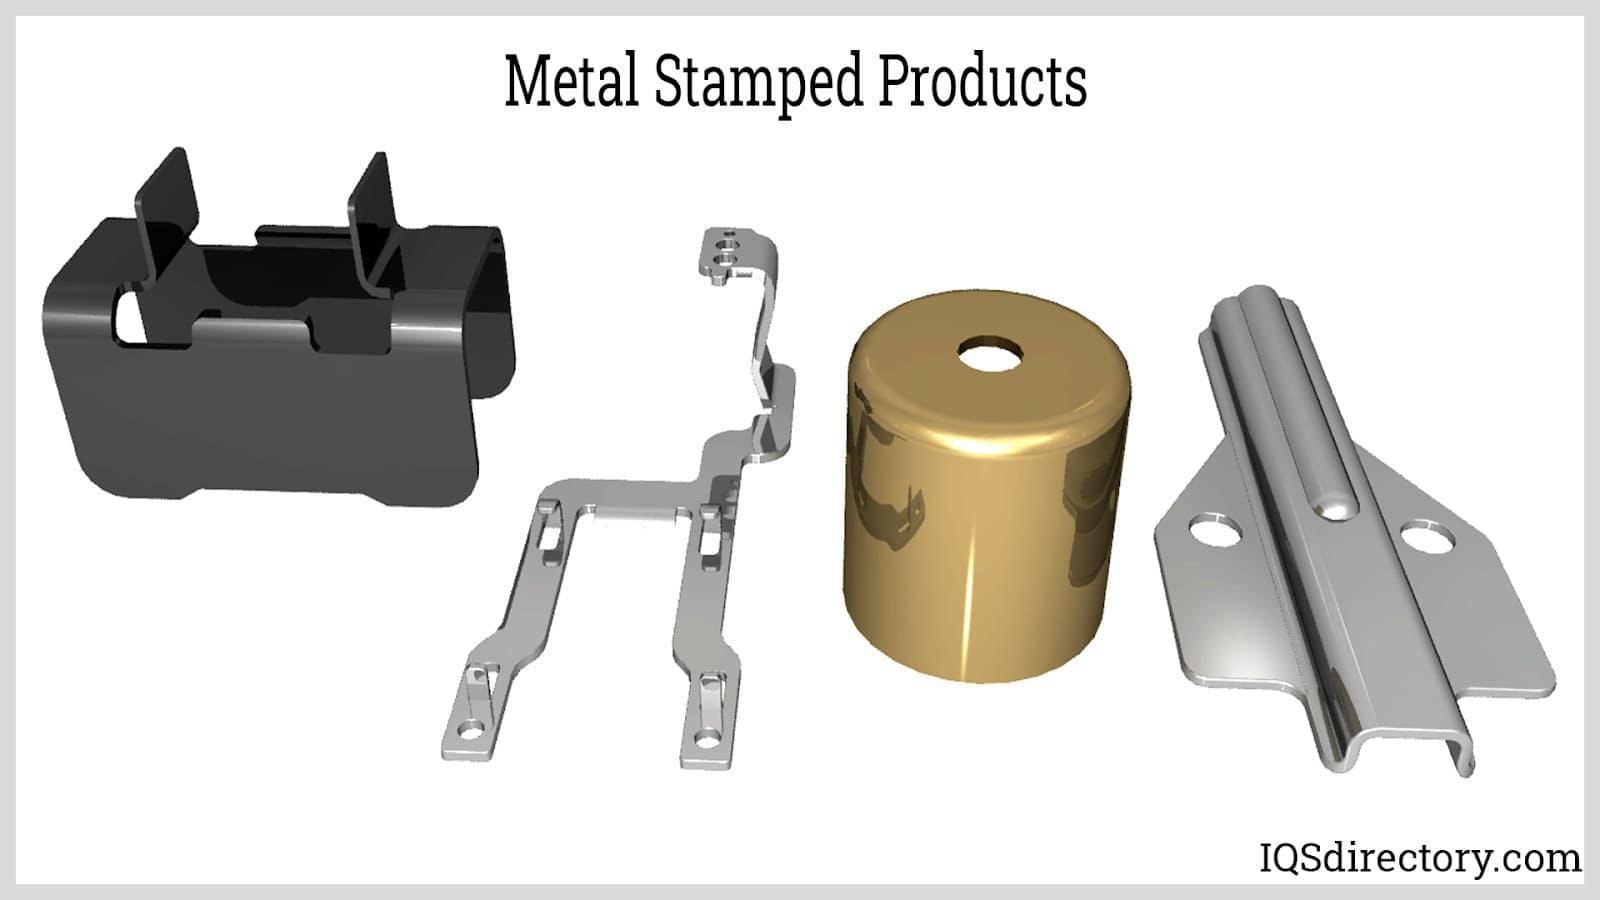 Stamped Metal Products